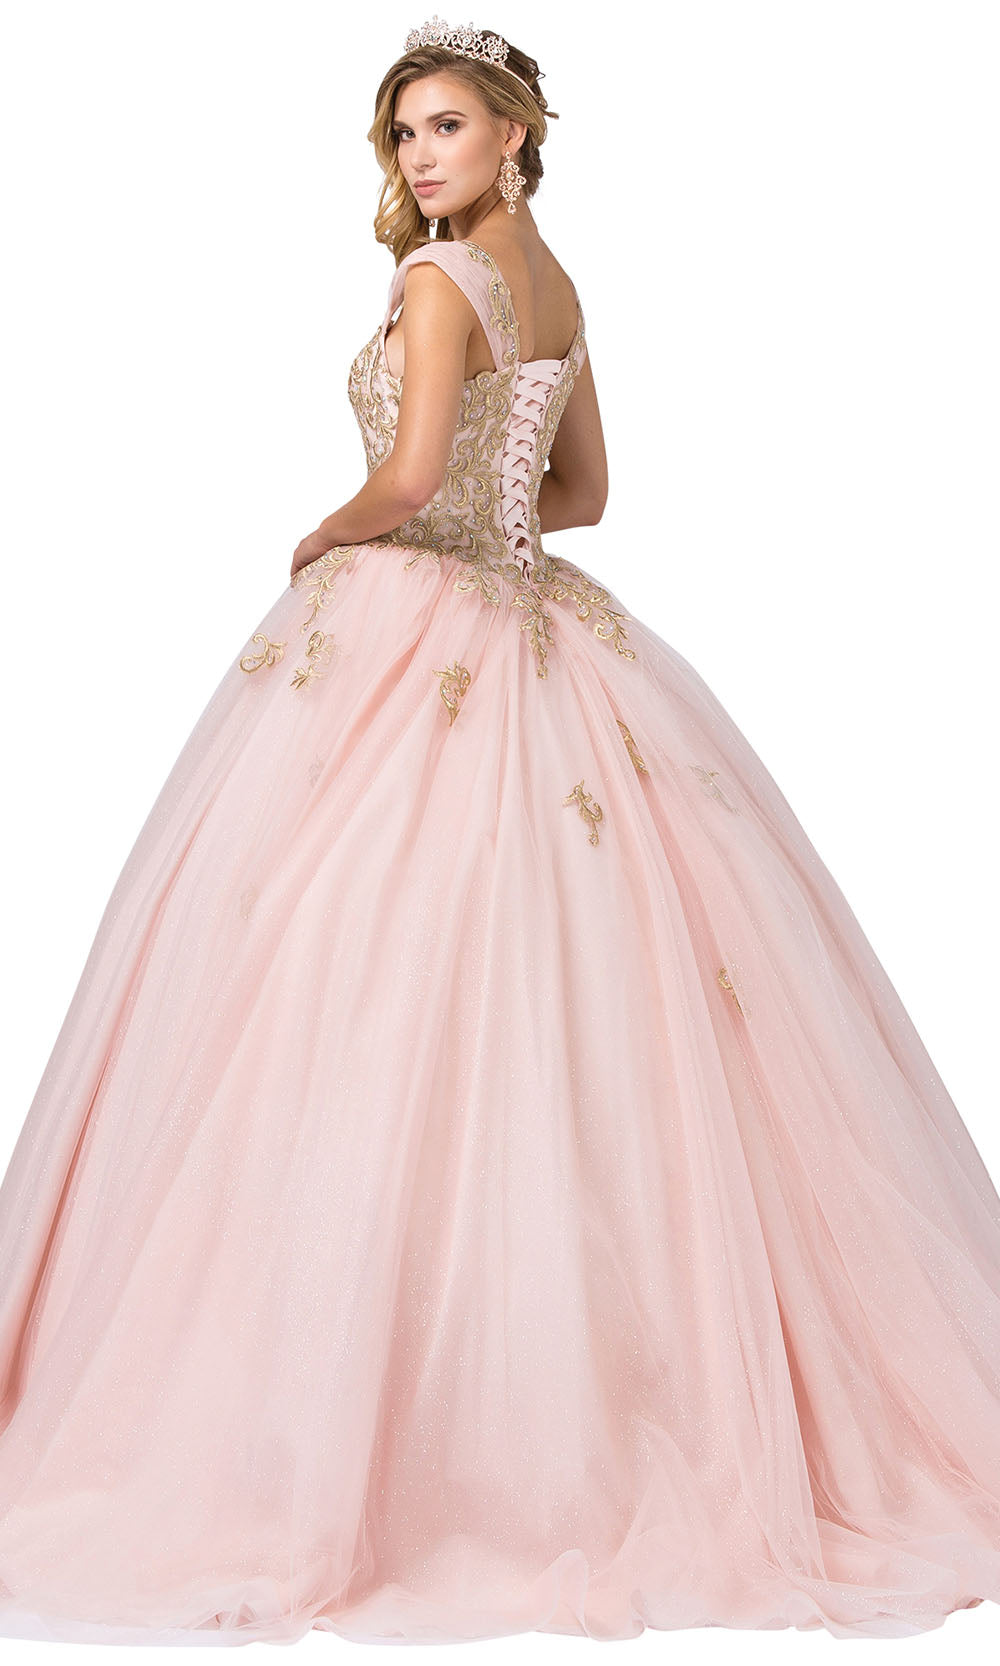 Dancing Queen - 1381 Royal Embroidery Tulle Ballgown In Pink